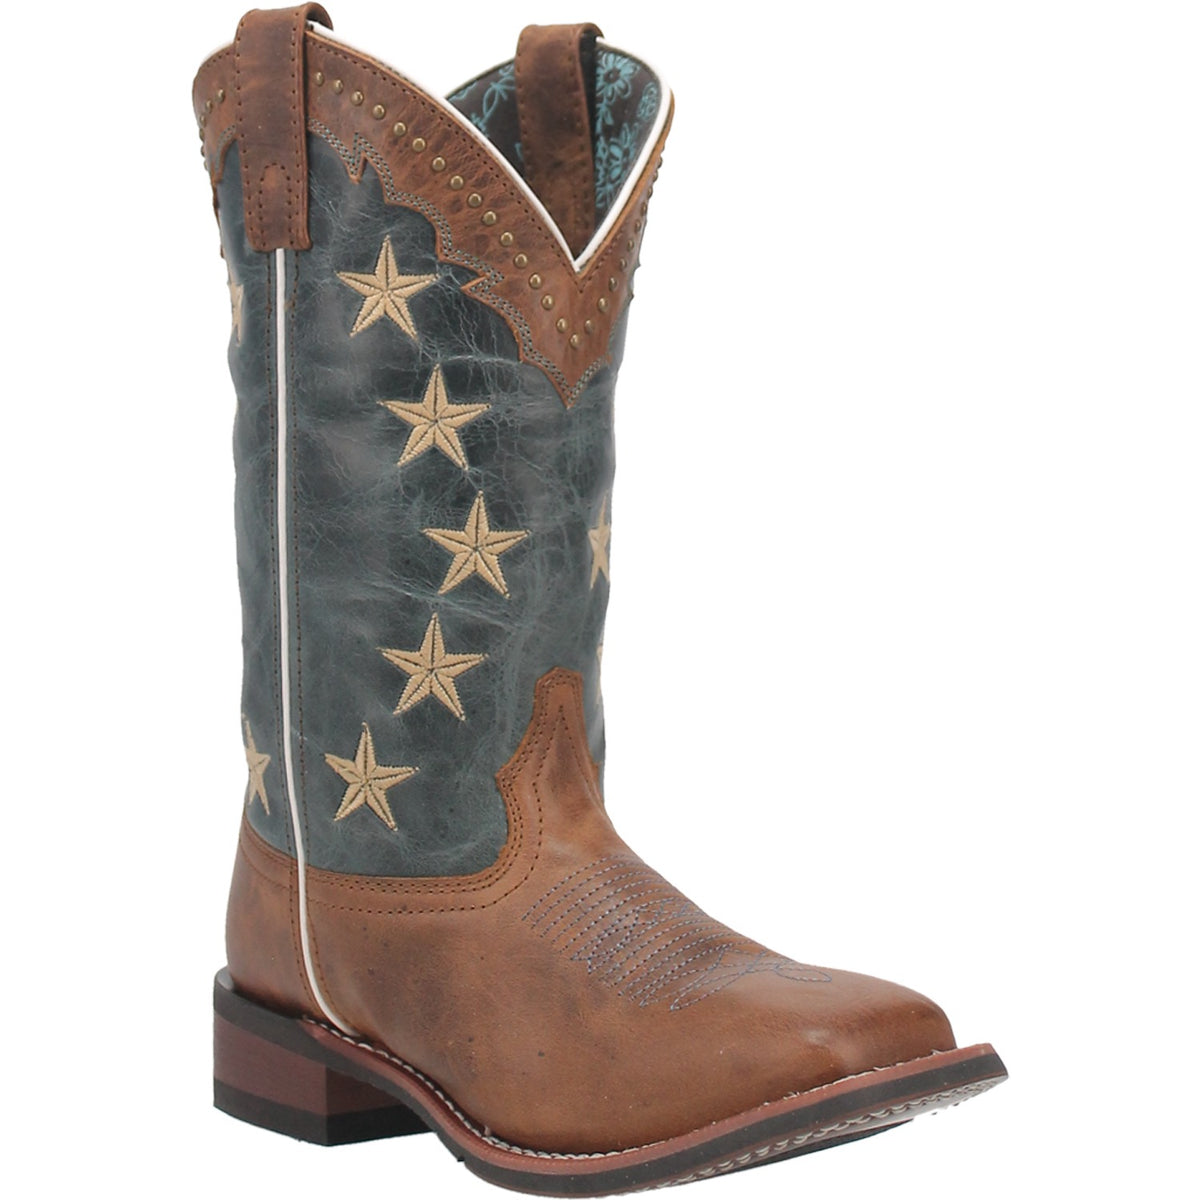 EARLY STAR LEATHER BOOT Cover